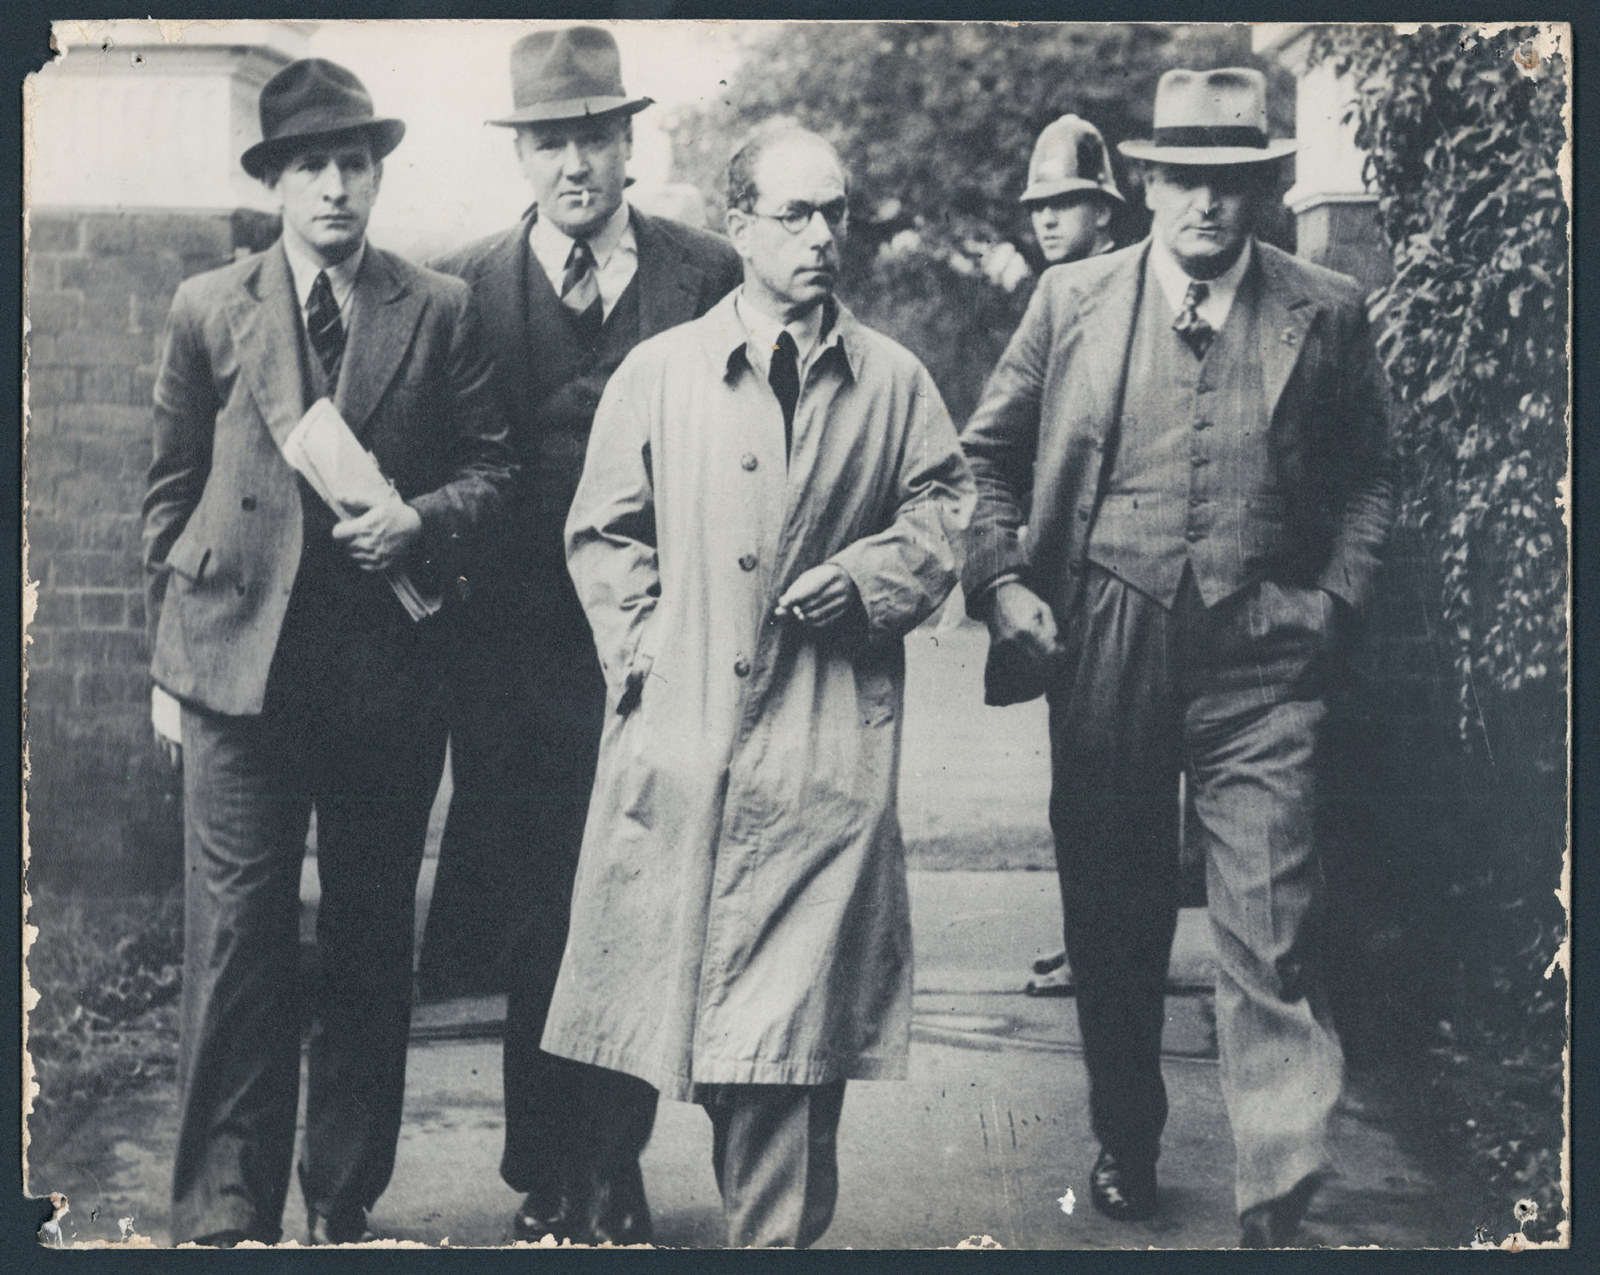 Photograph of Antonio Agostini with police in 1944